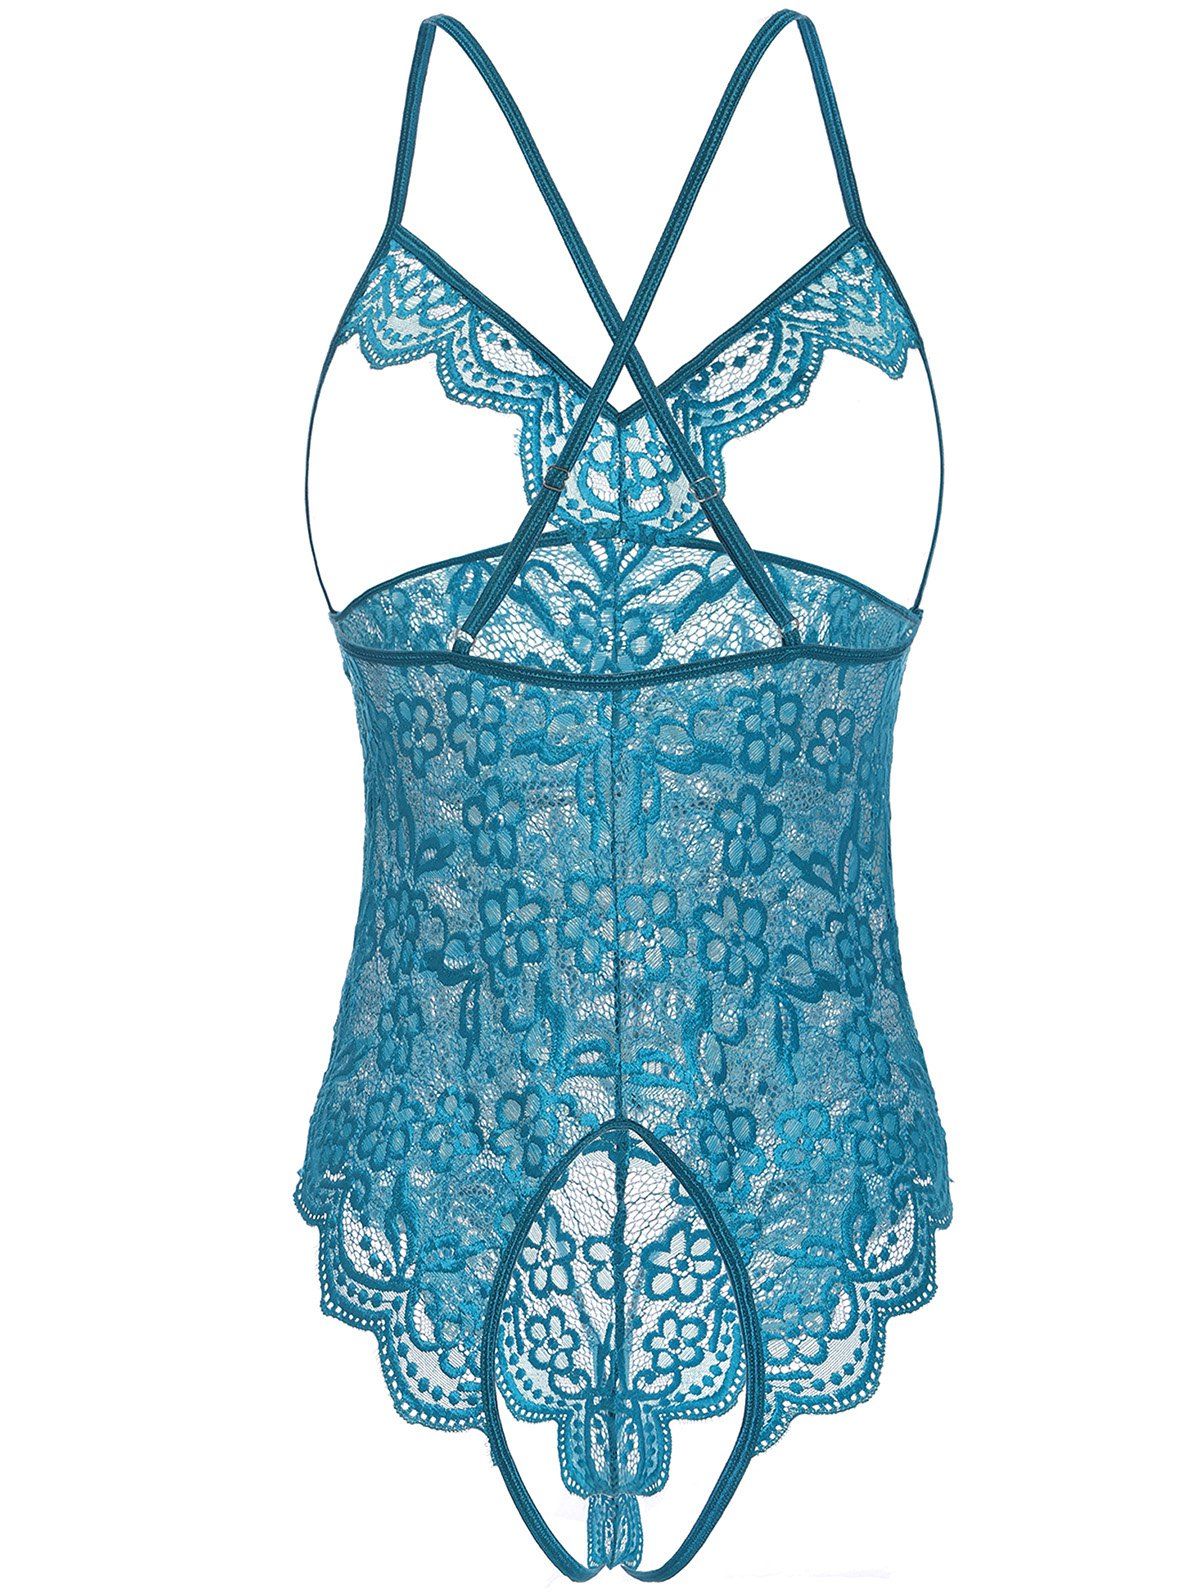 [43% OFF] 2020 Floral Lace Open Cup Criss Cross Teddy In BLUE | DressLily